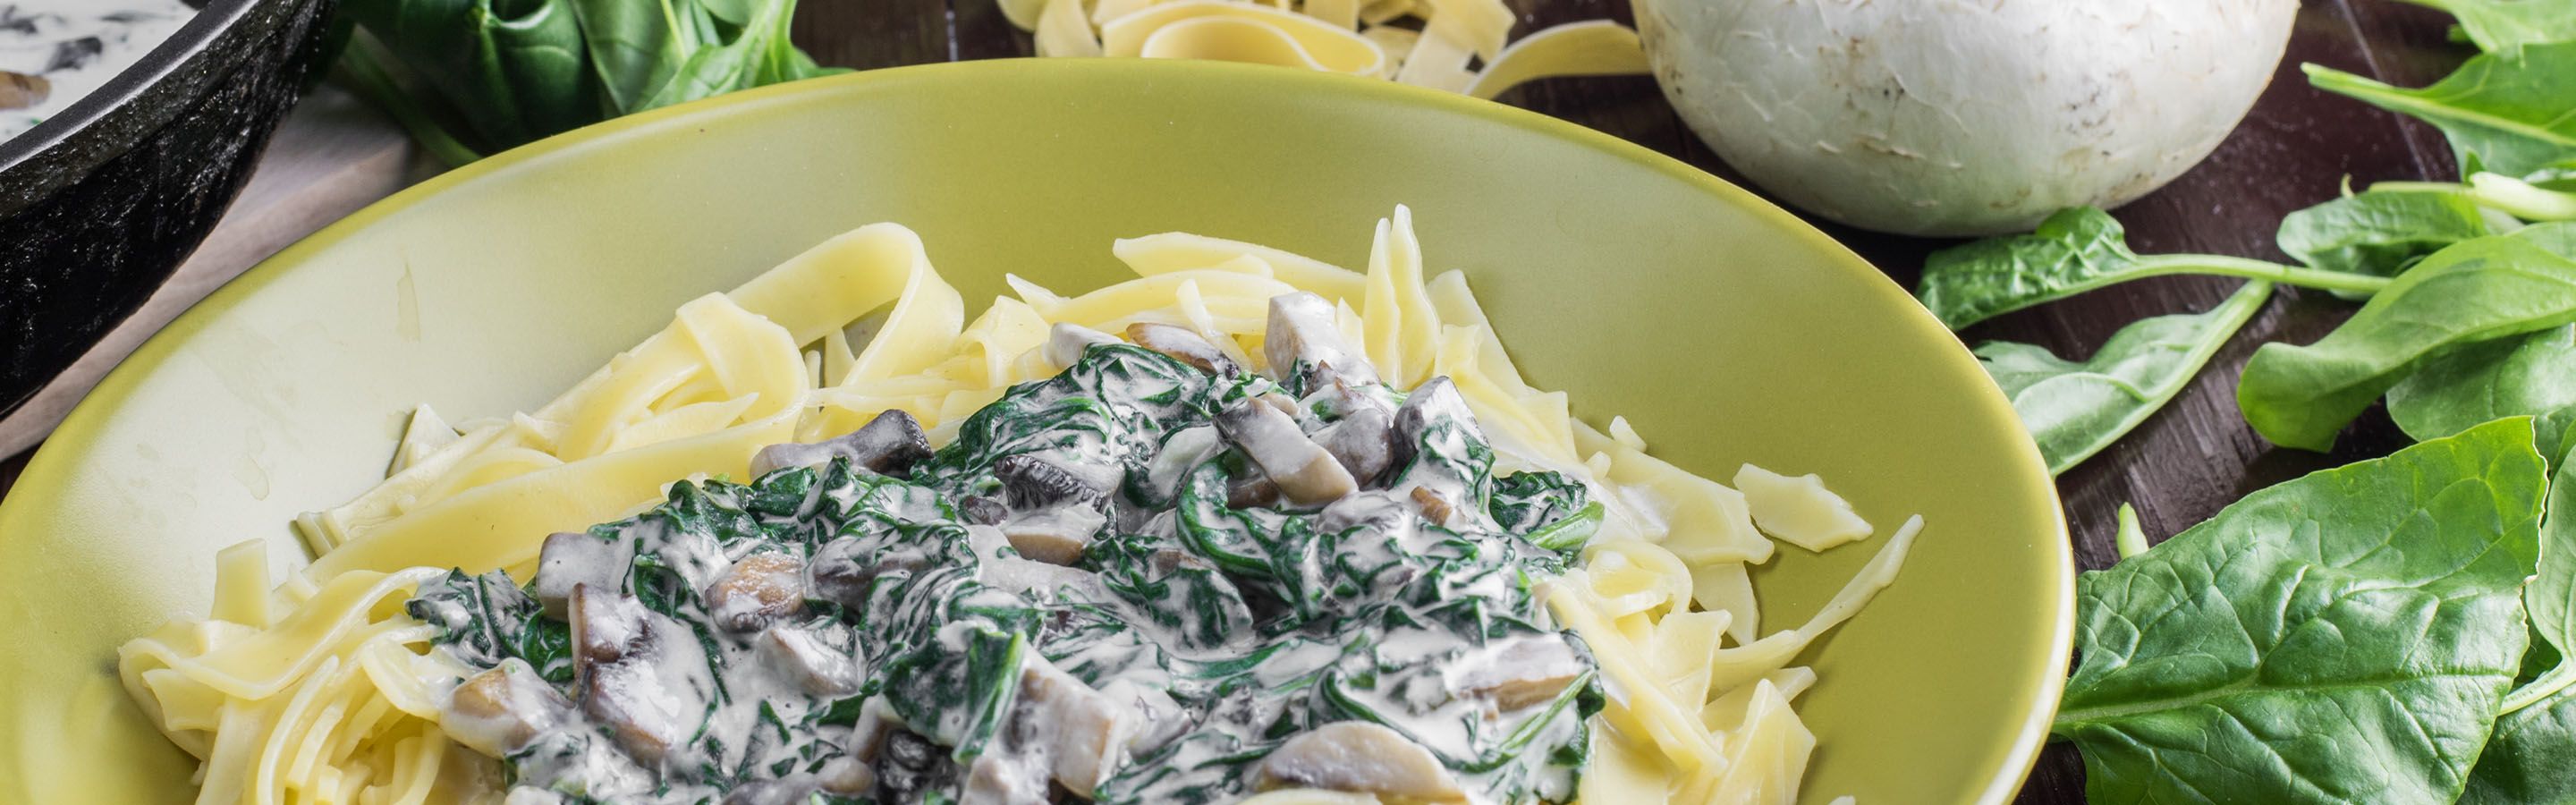 Fettuccine with Spinach and Blue Cheese Sauce